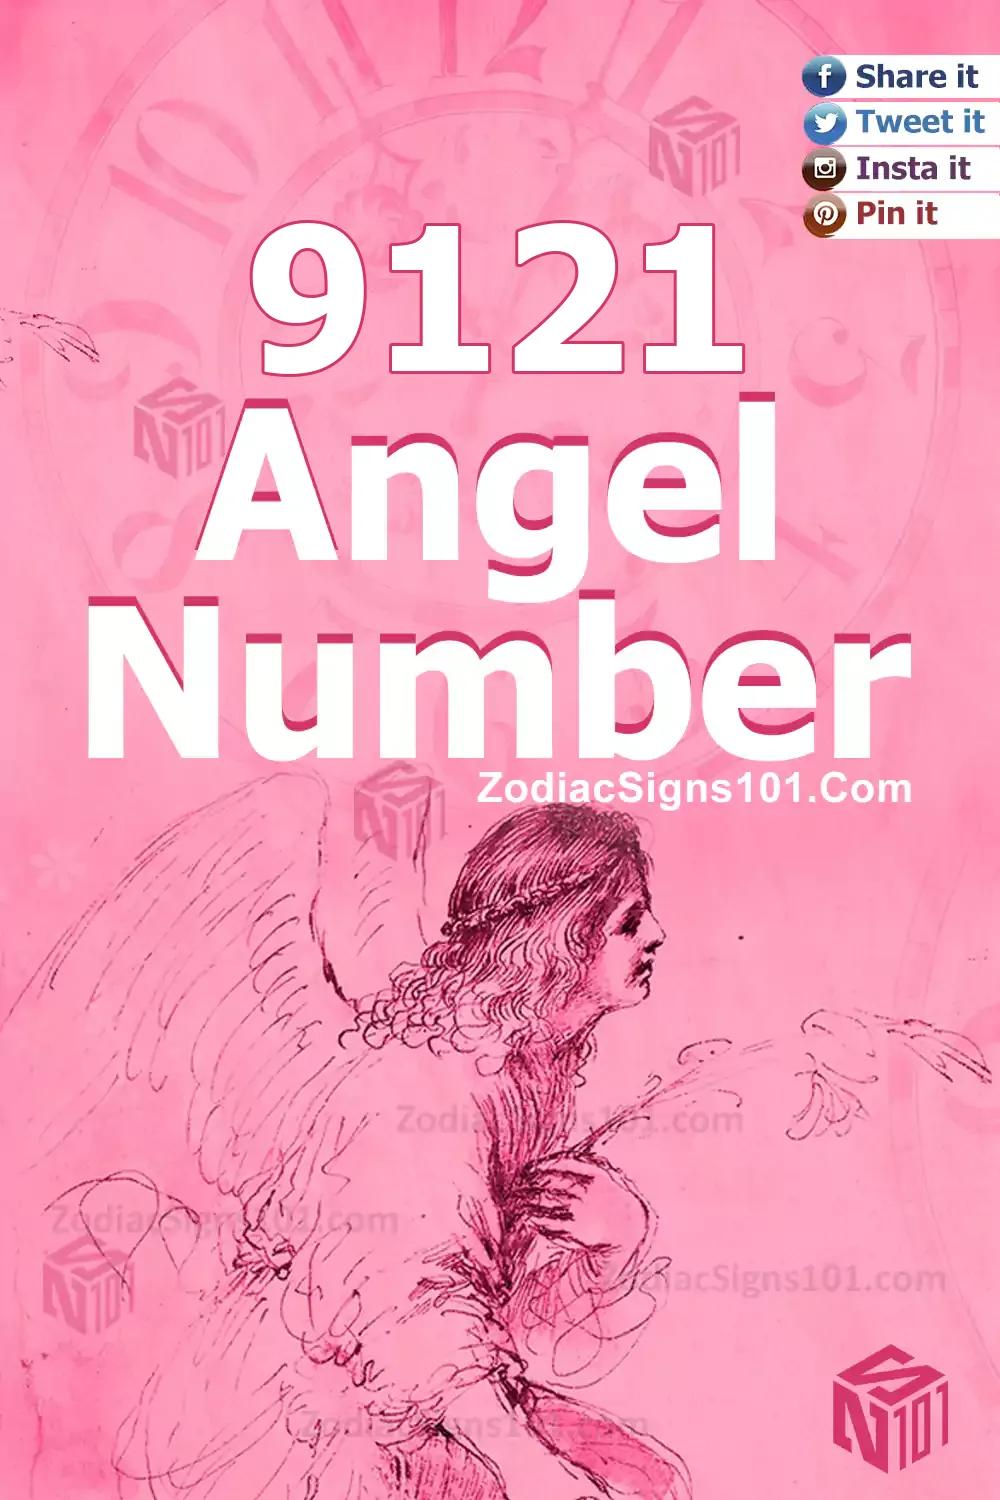 9121 Angel Number Meaning